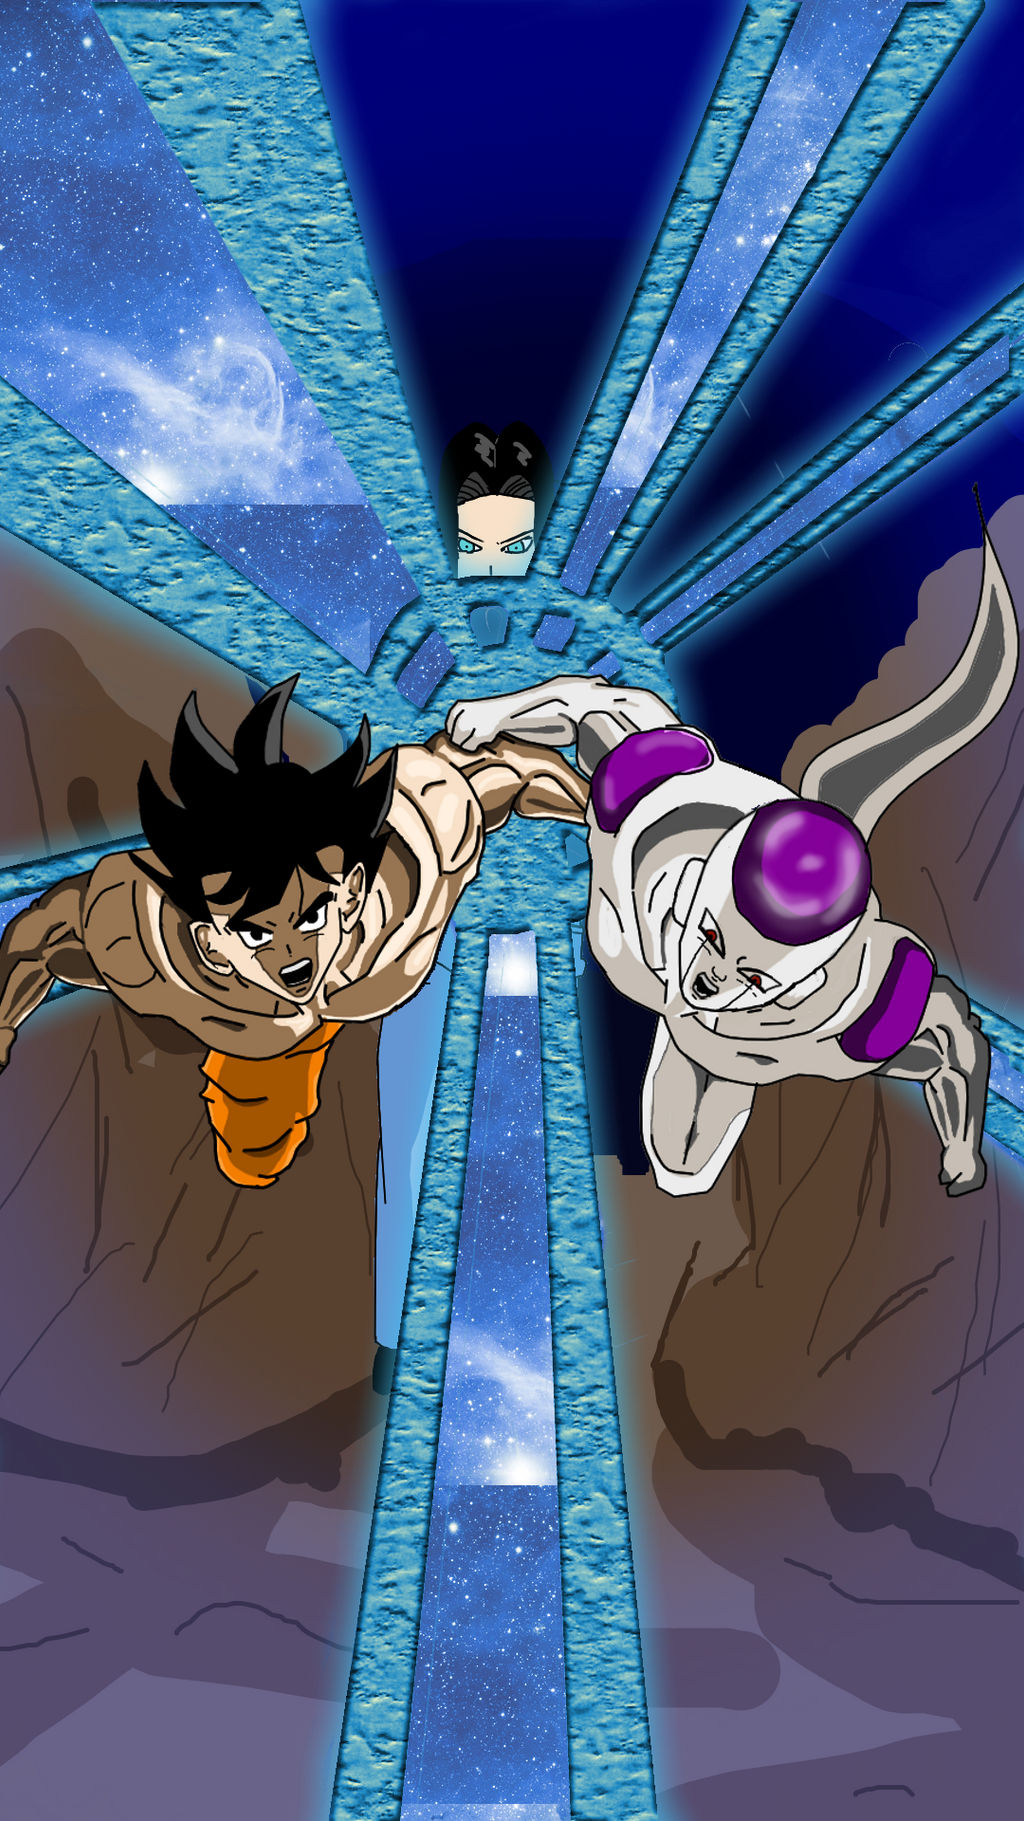 An unlikely team) Goku, Frieza and Android 17 by kehkeh123 on DeviantArt